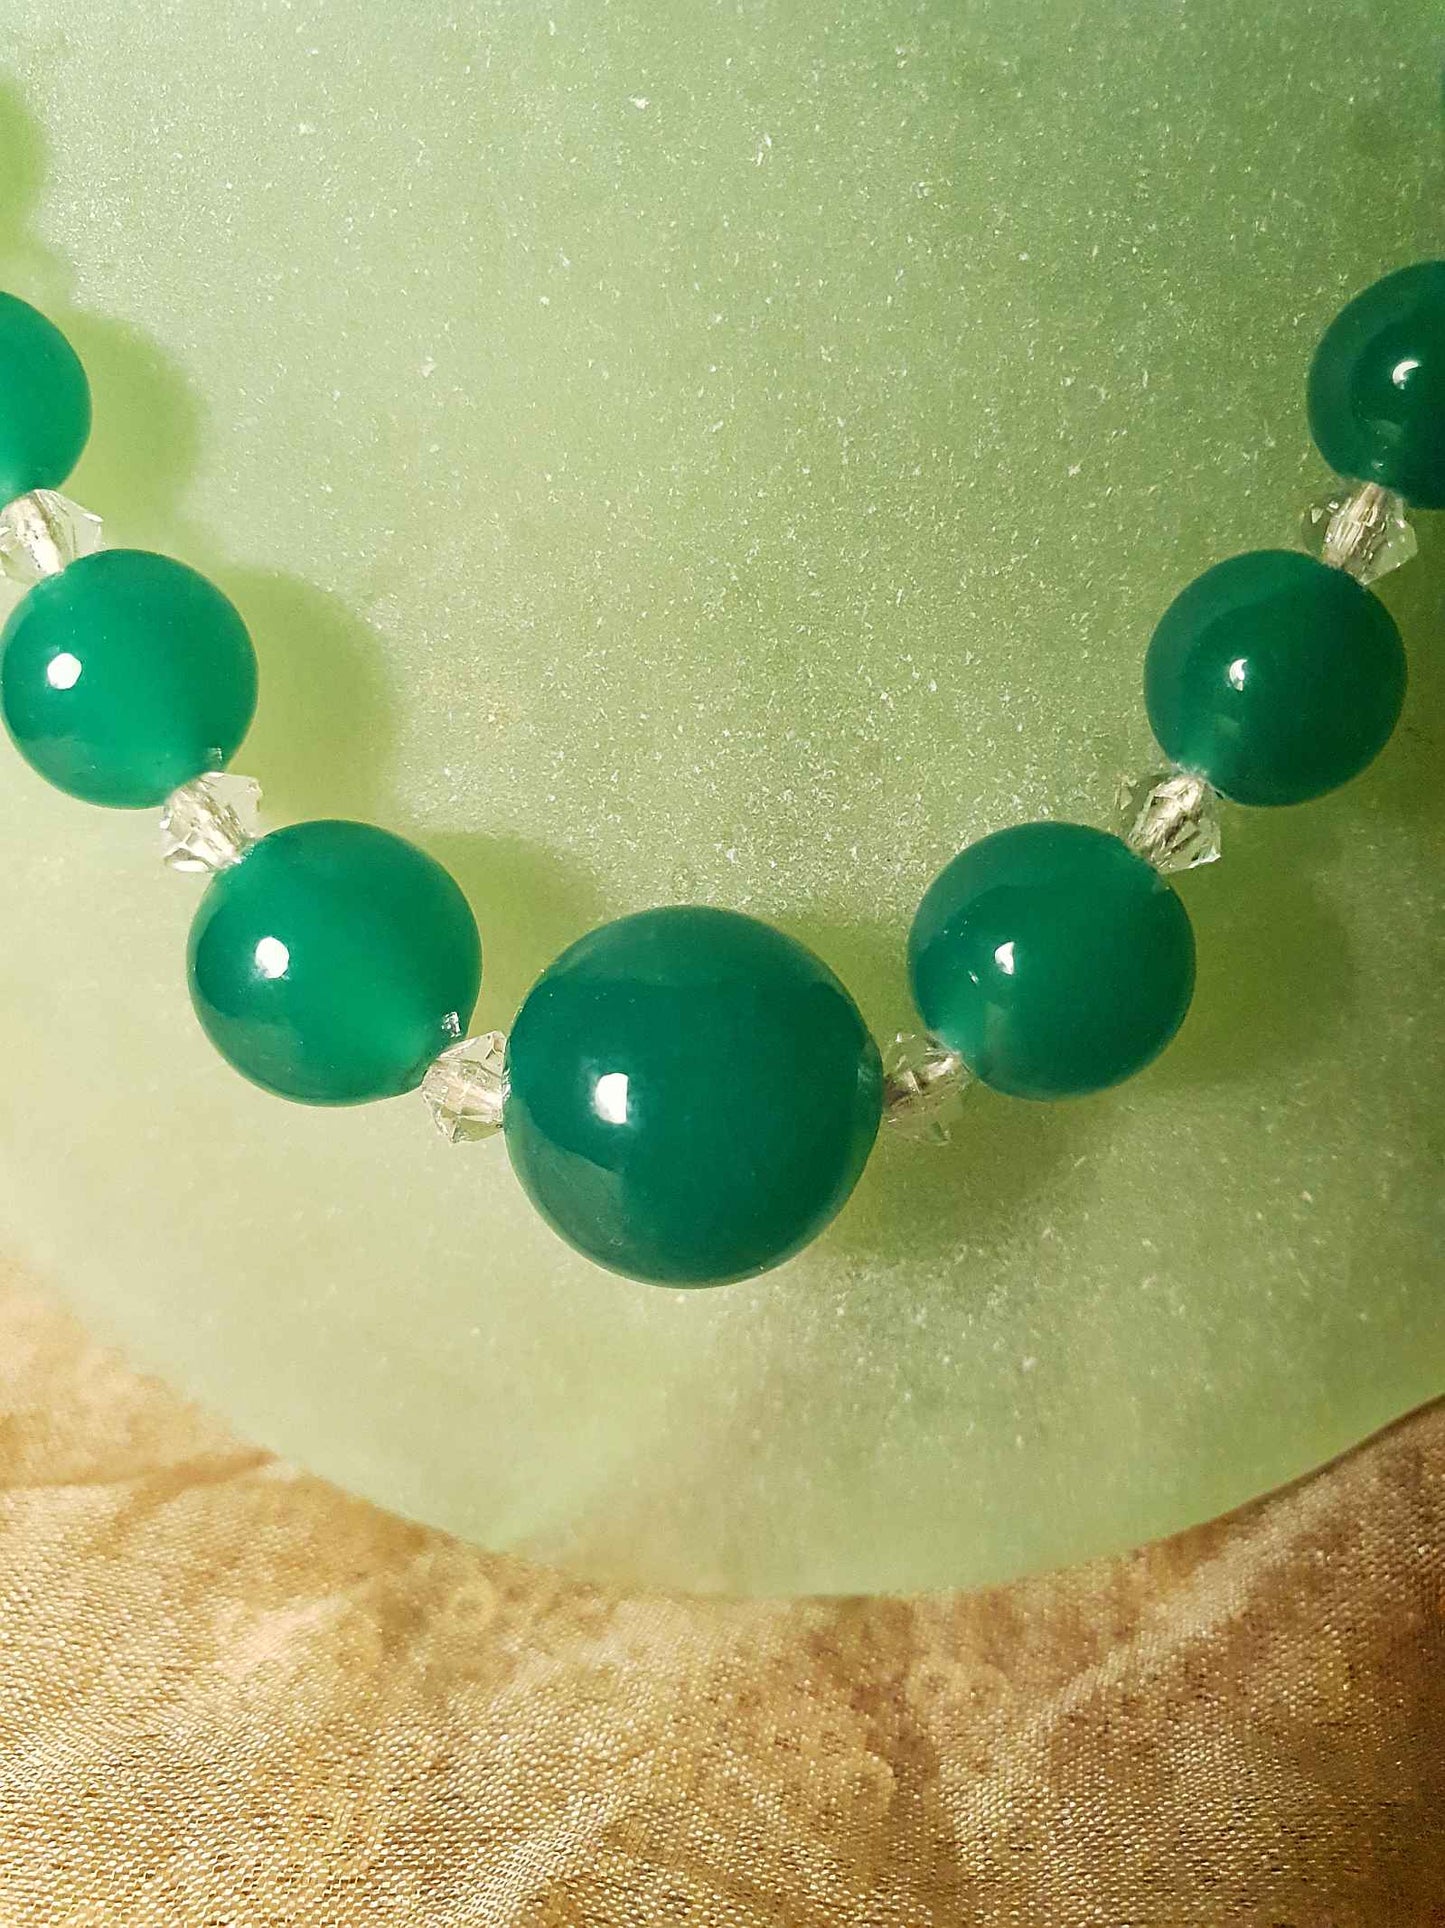 Cute Vintage 1930s Green Glass Bead Necklace